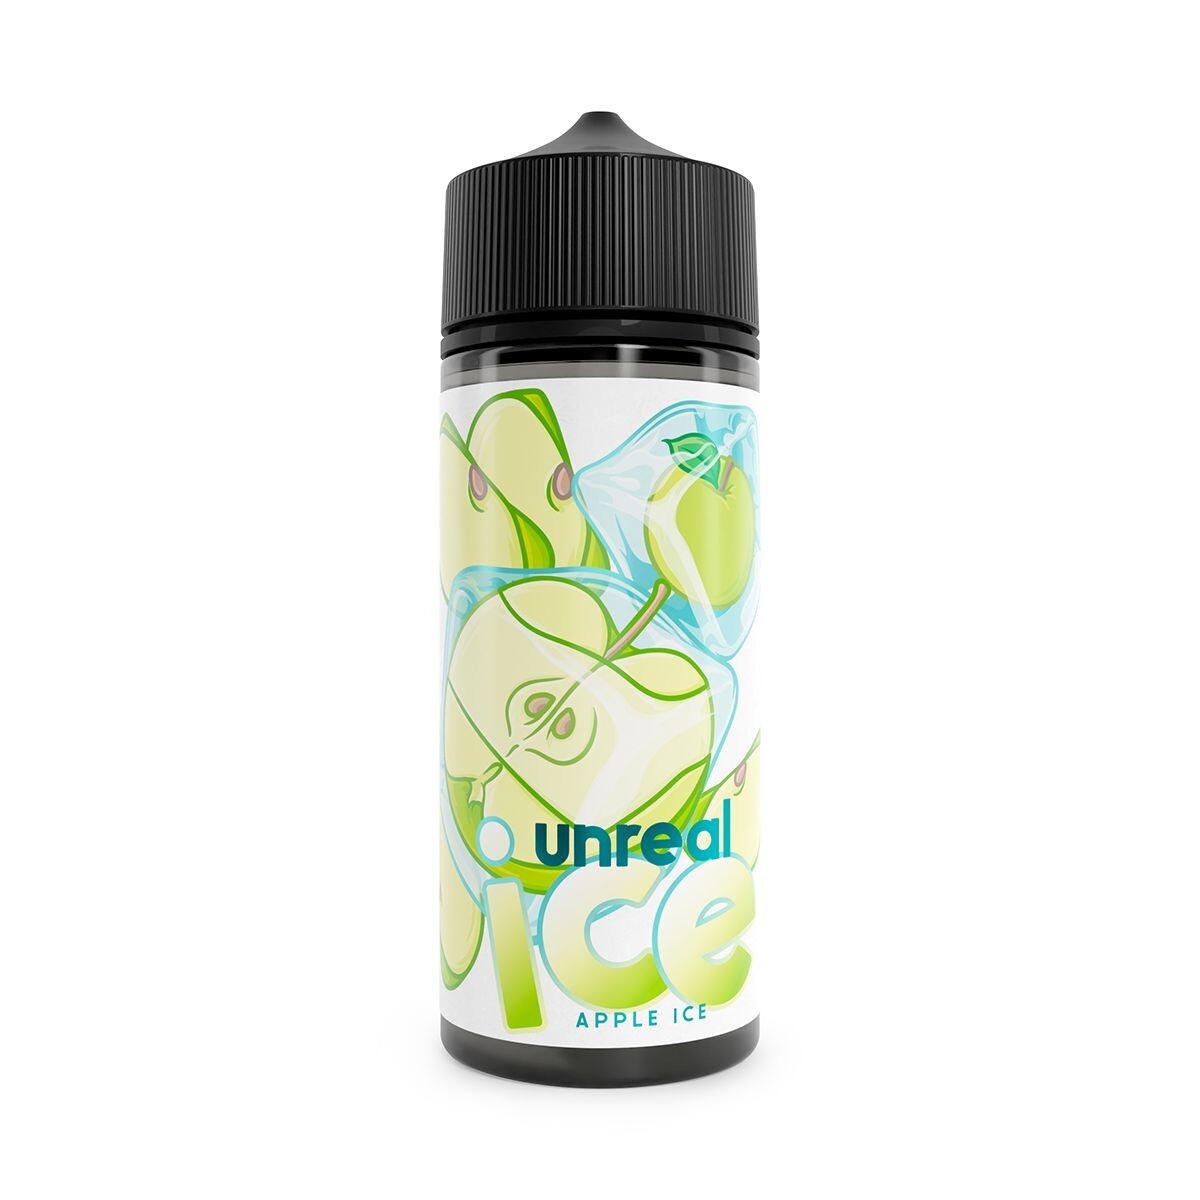 Unreal Ice Apple Ice Shortfill, A Super Fresh Flavour Available At Dispergo Vaping UK